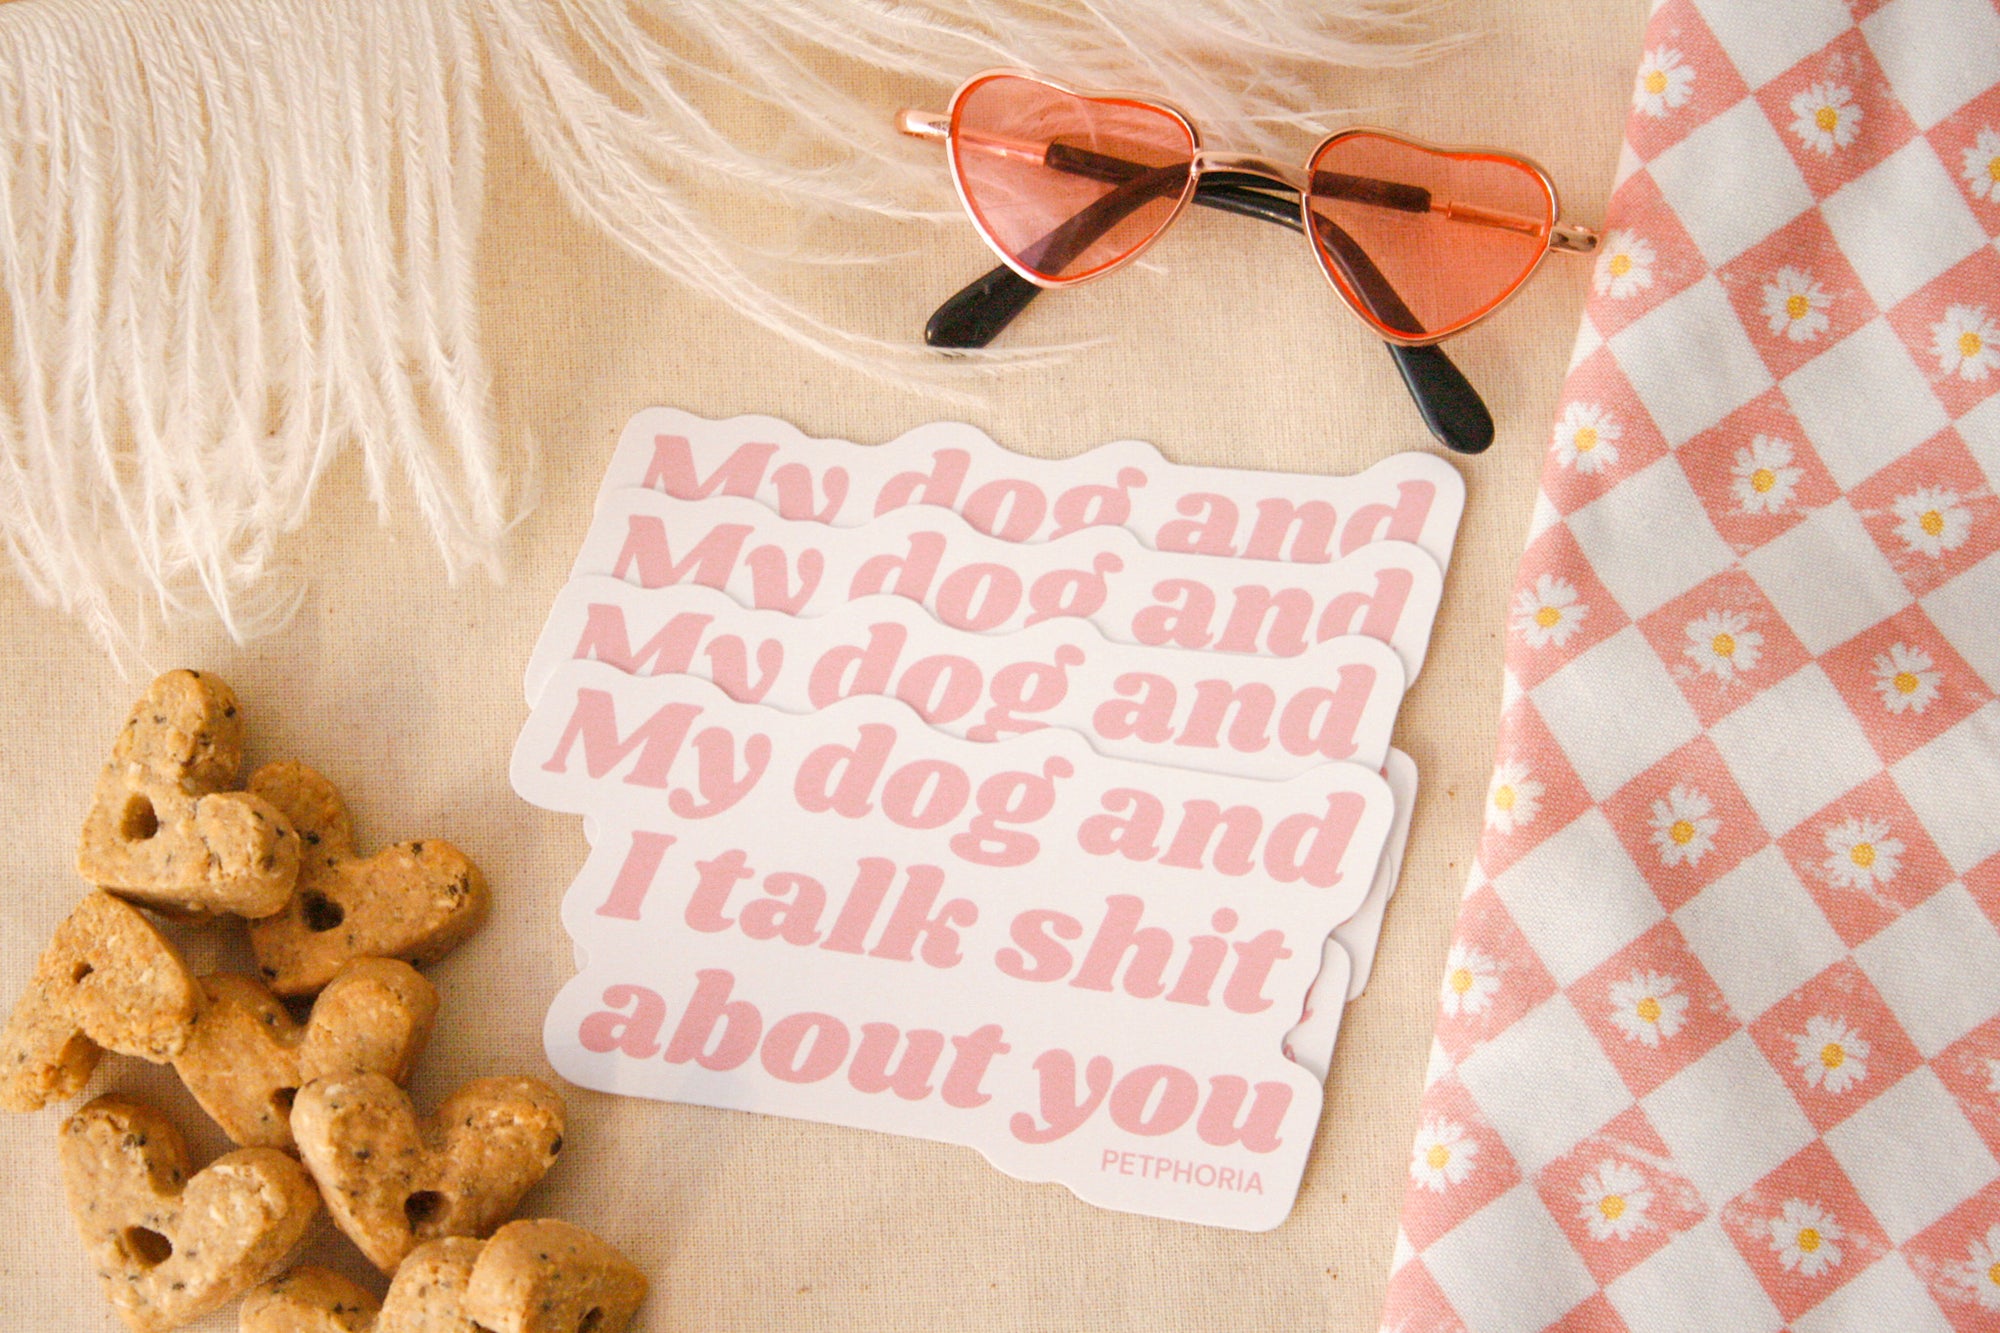 My Dog and I Talk S*** About You Sticker